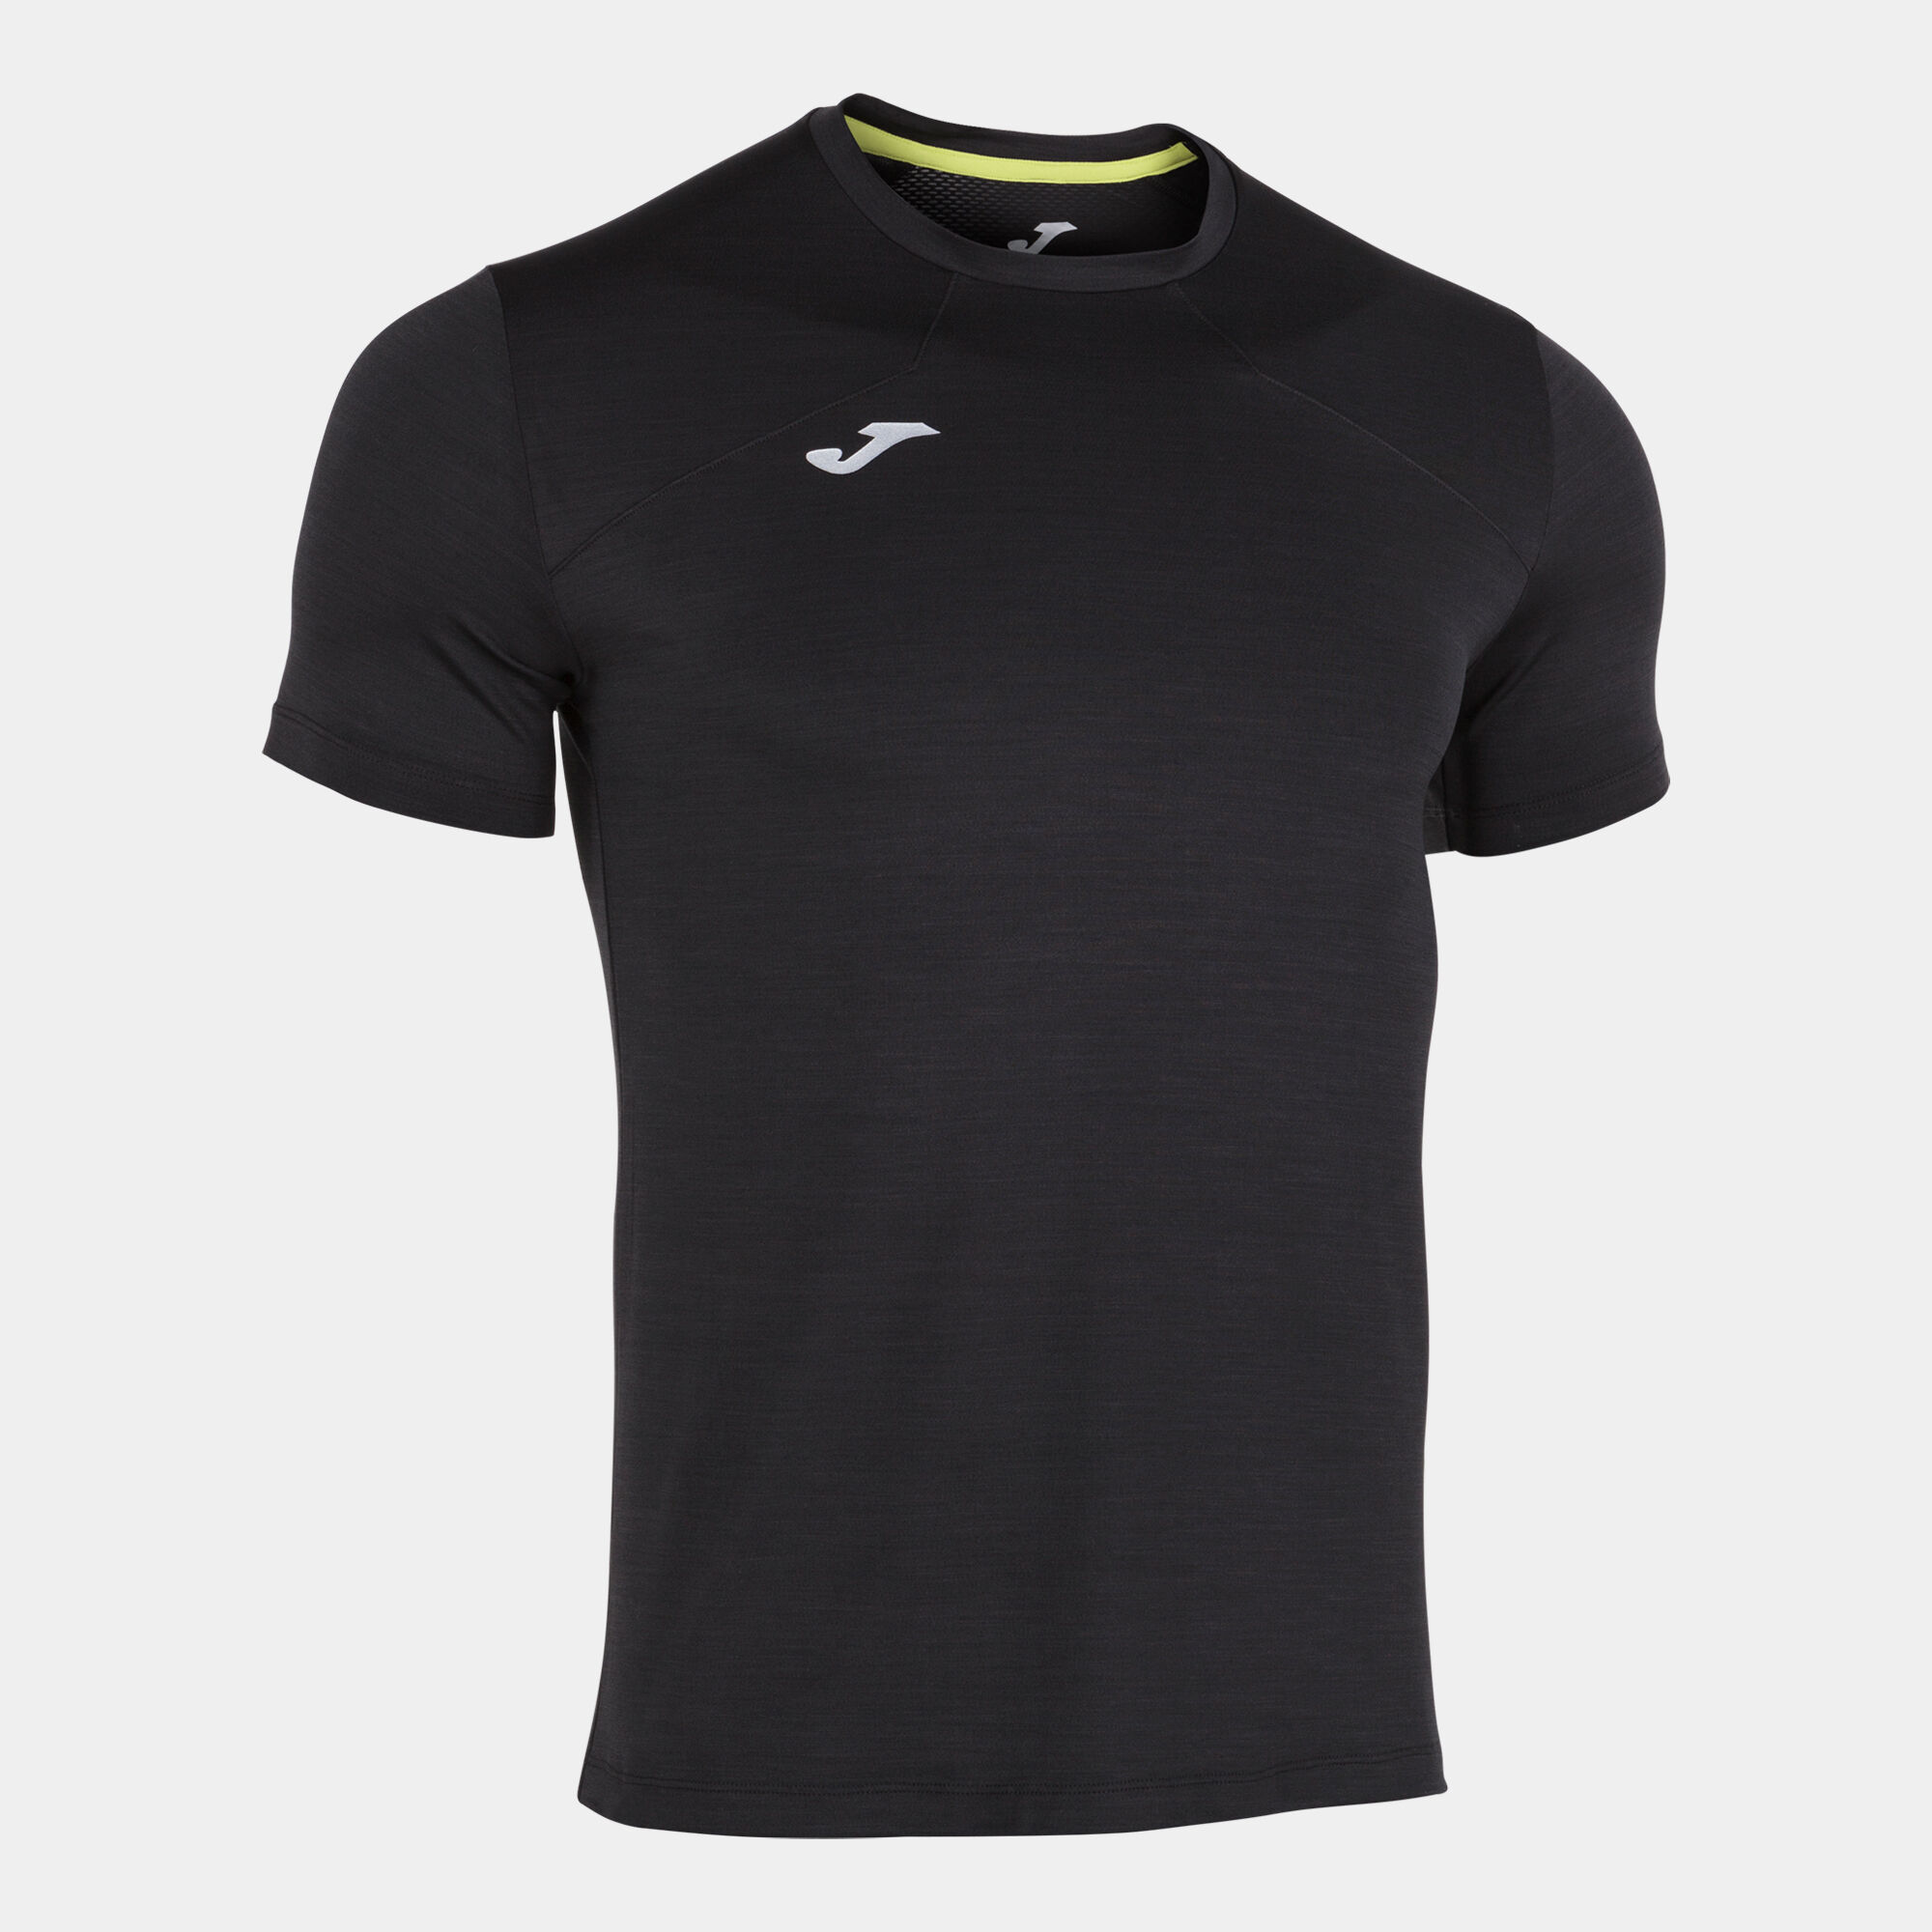 MAILLOT MANCHES COURTES HOMME RUNNING NIGHT NOIR